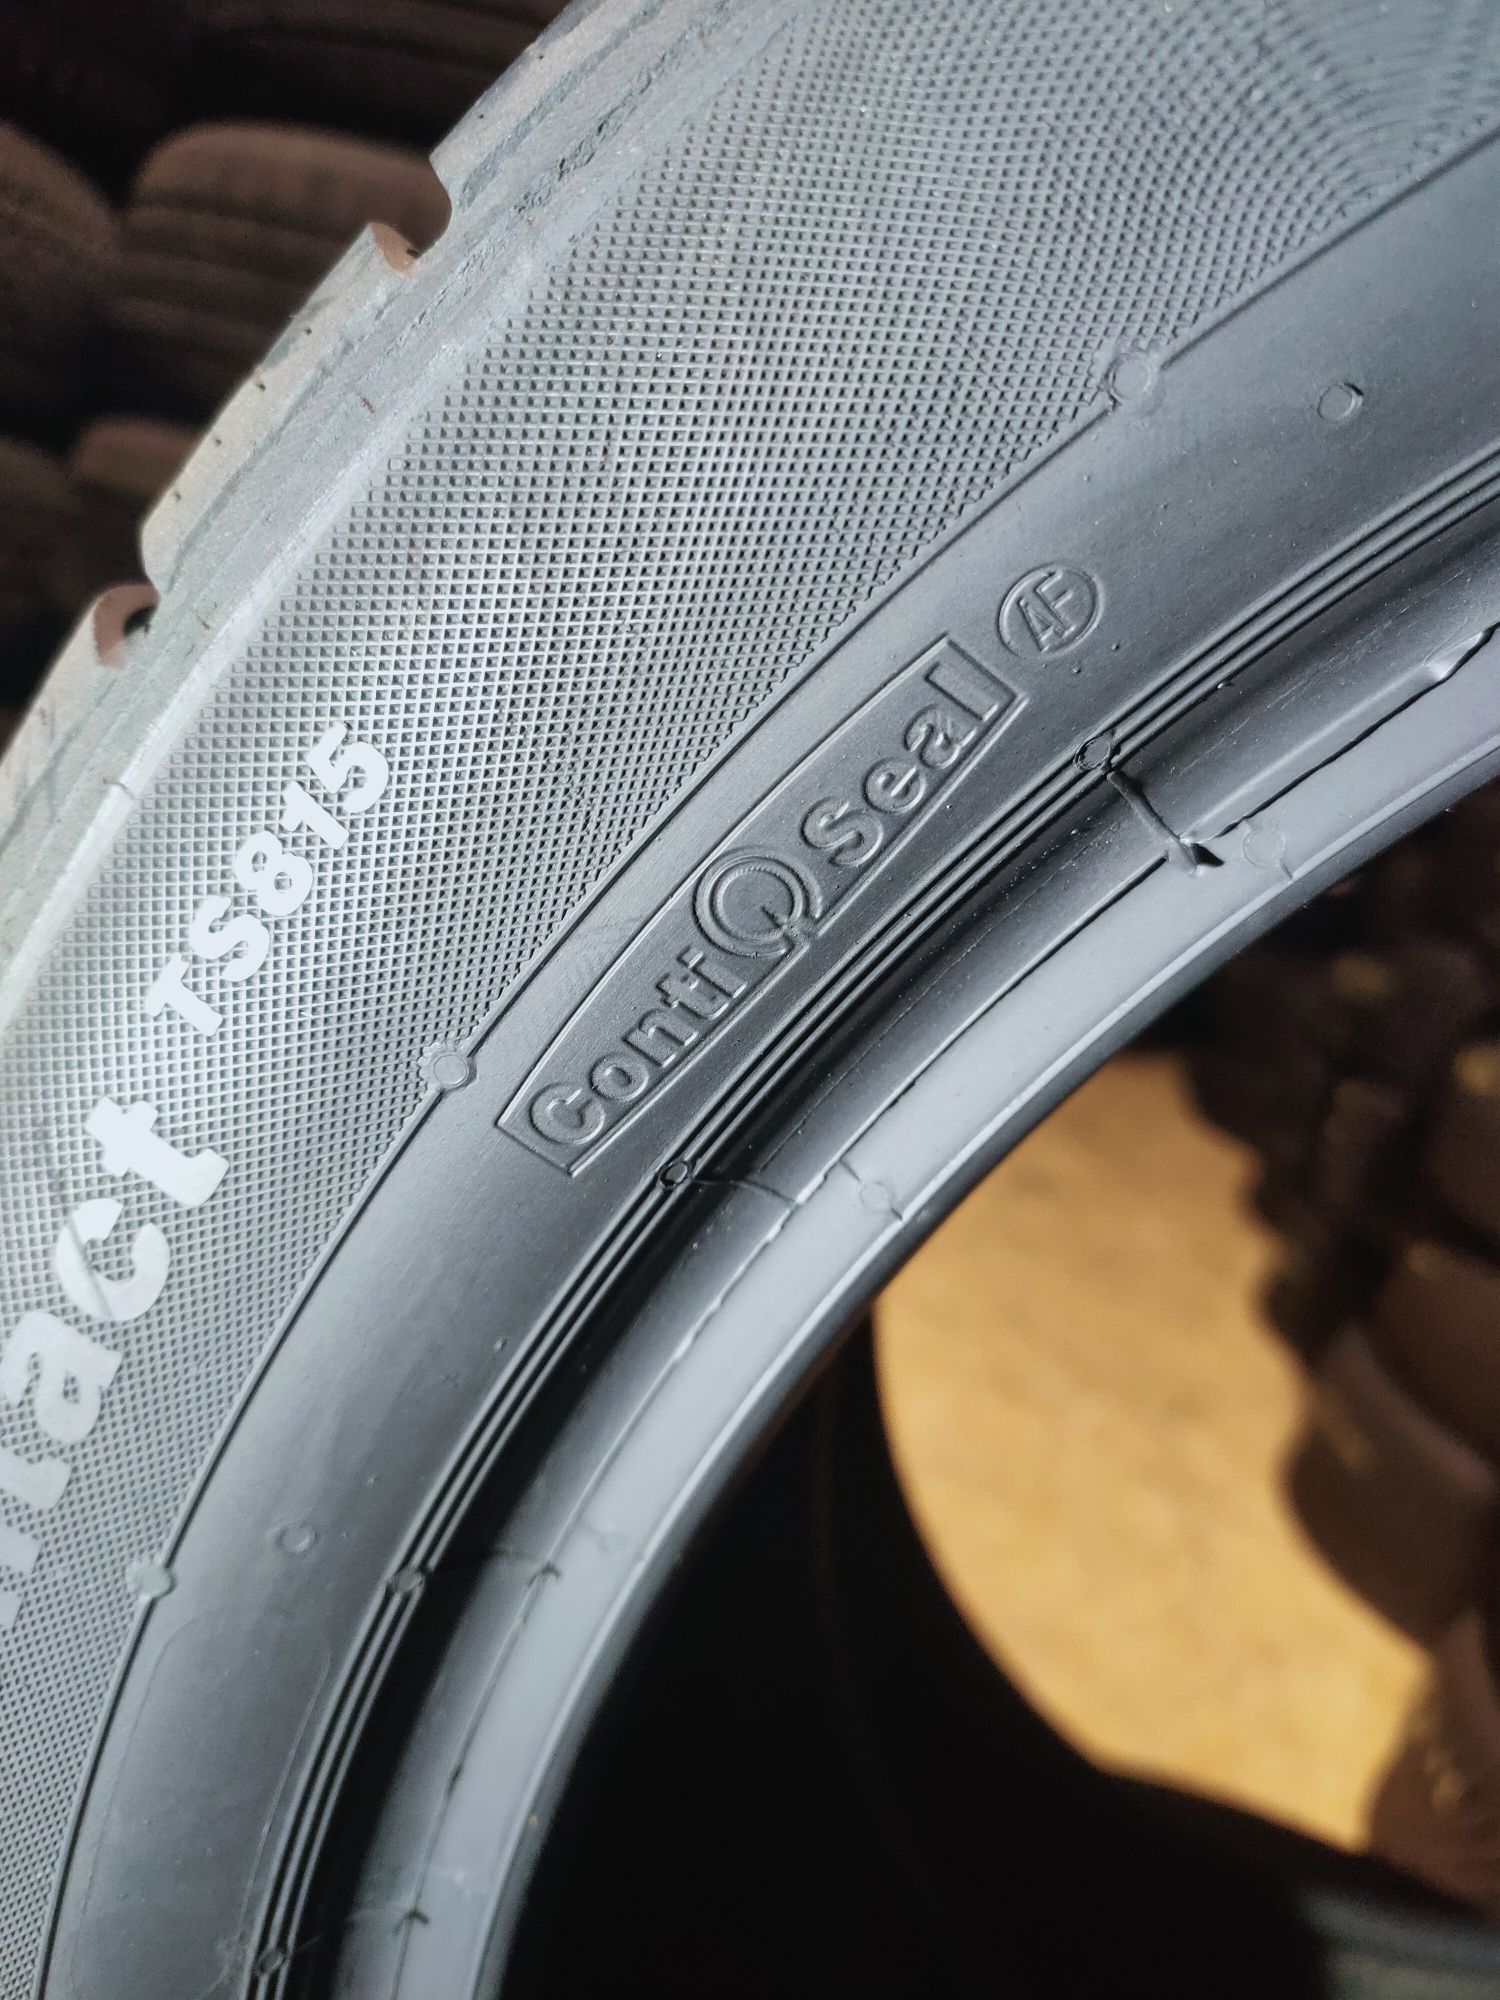 2015/50R17 Continental ContiContact TS815 z 2017r 7,2 mm